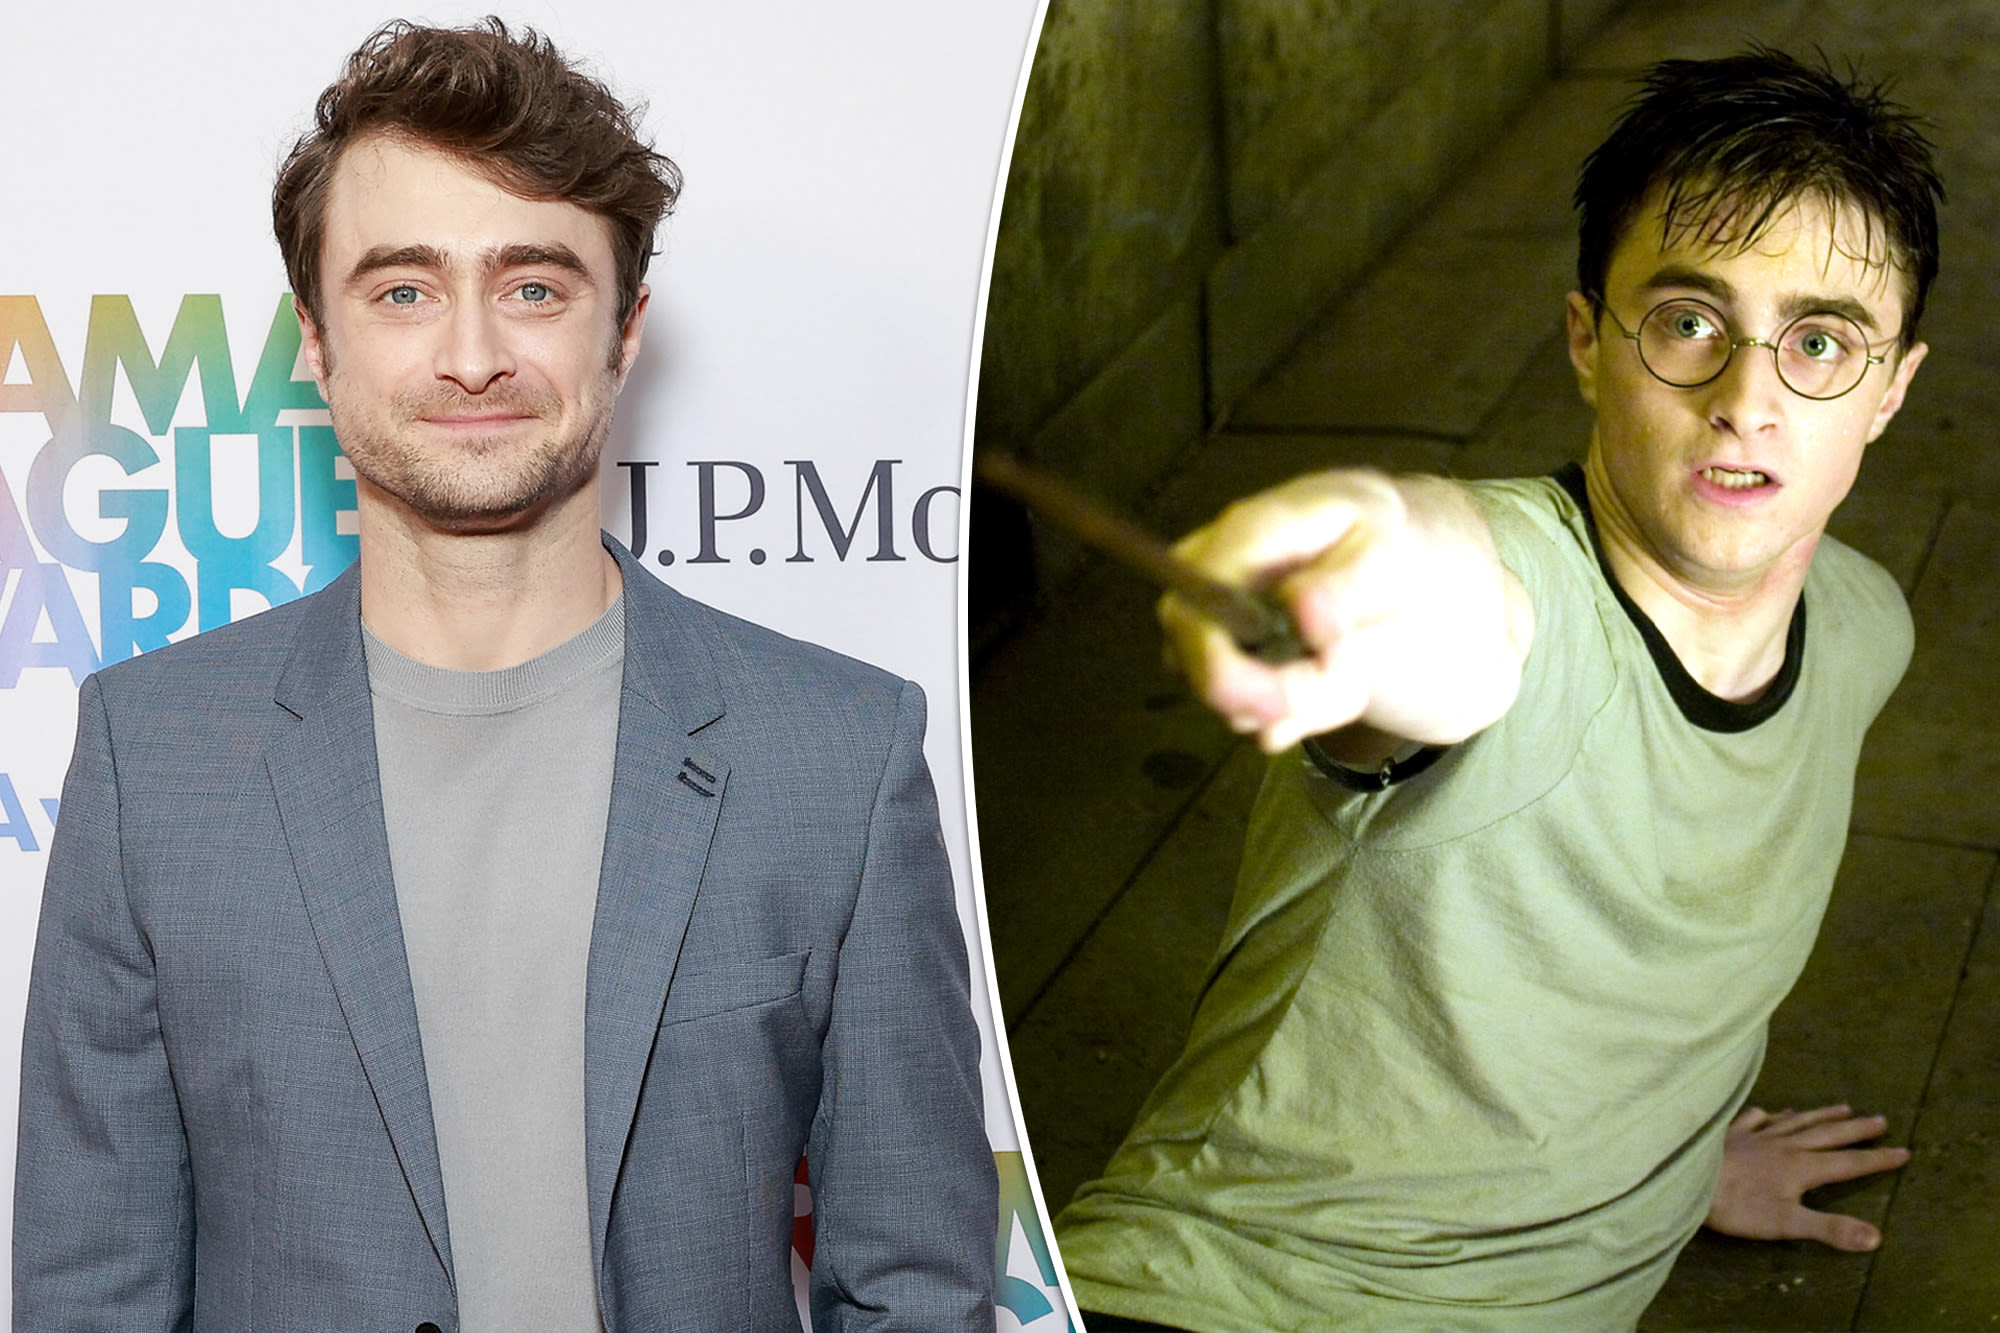 Daniel Radcliffe reveals his true thoughts about the ‘Harry Potter’ TV series